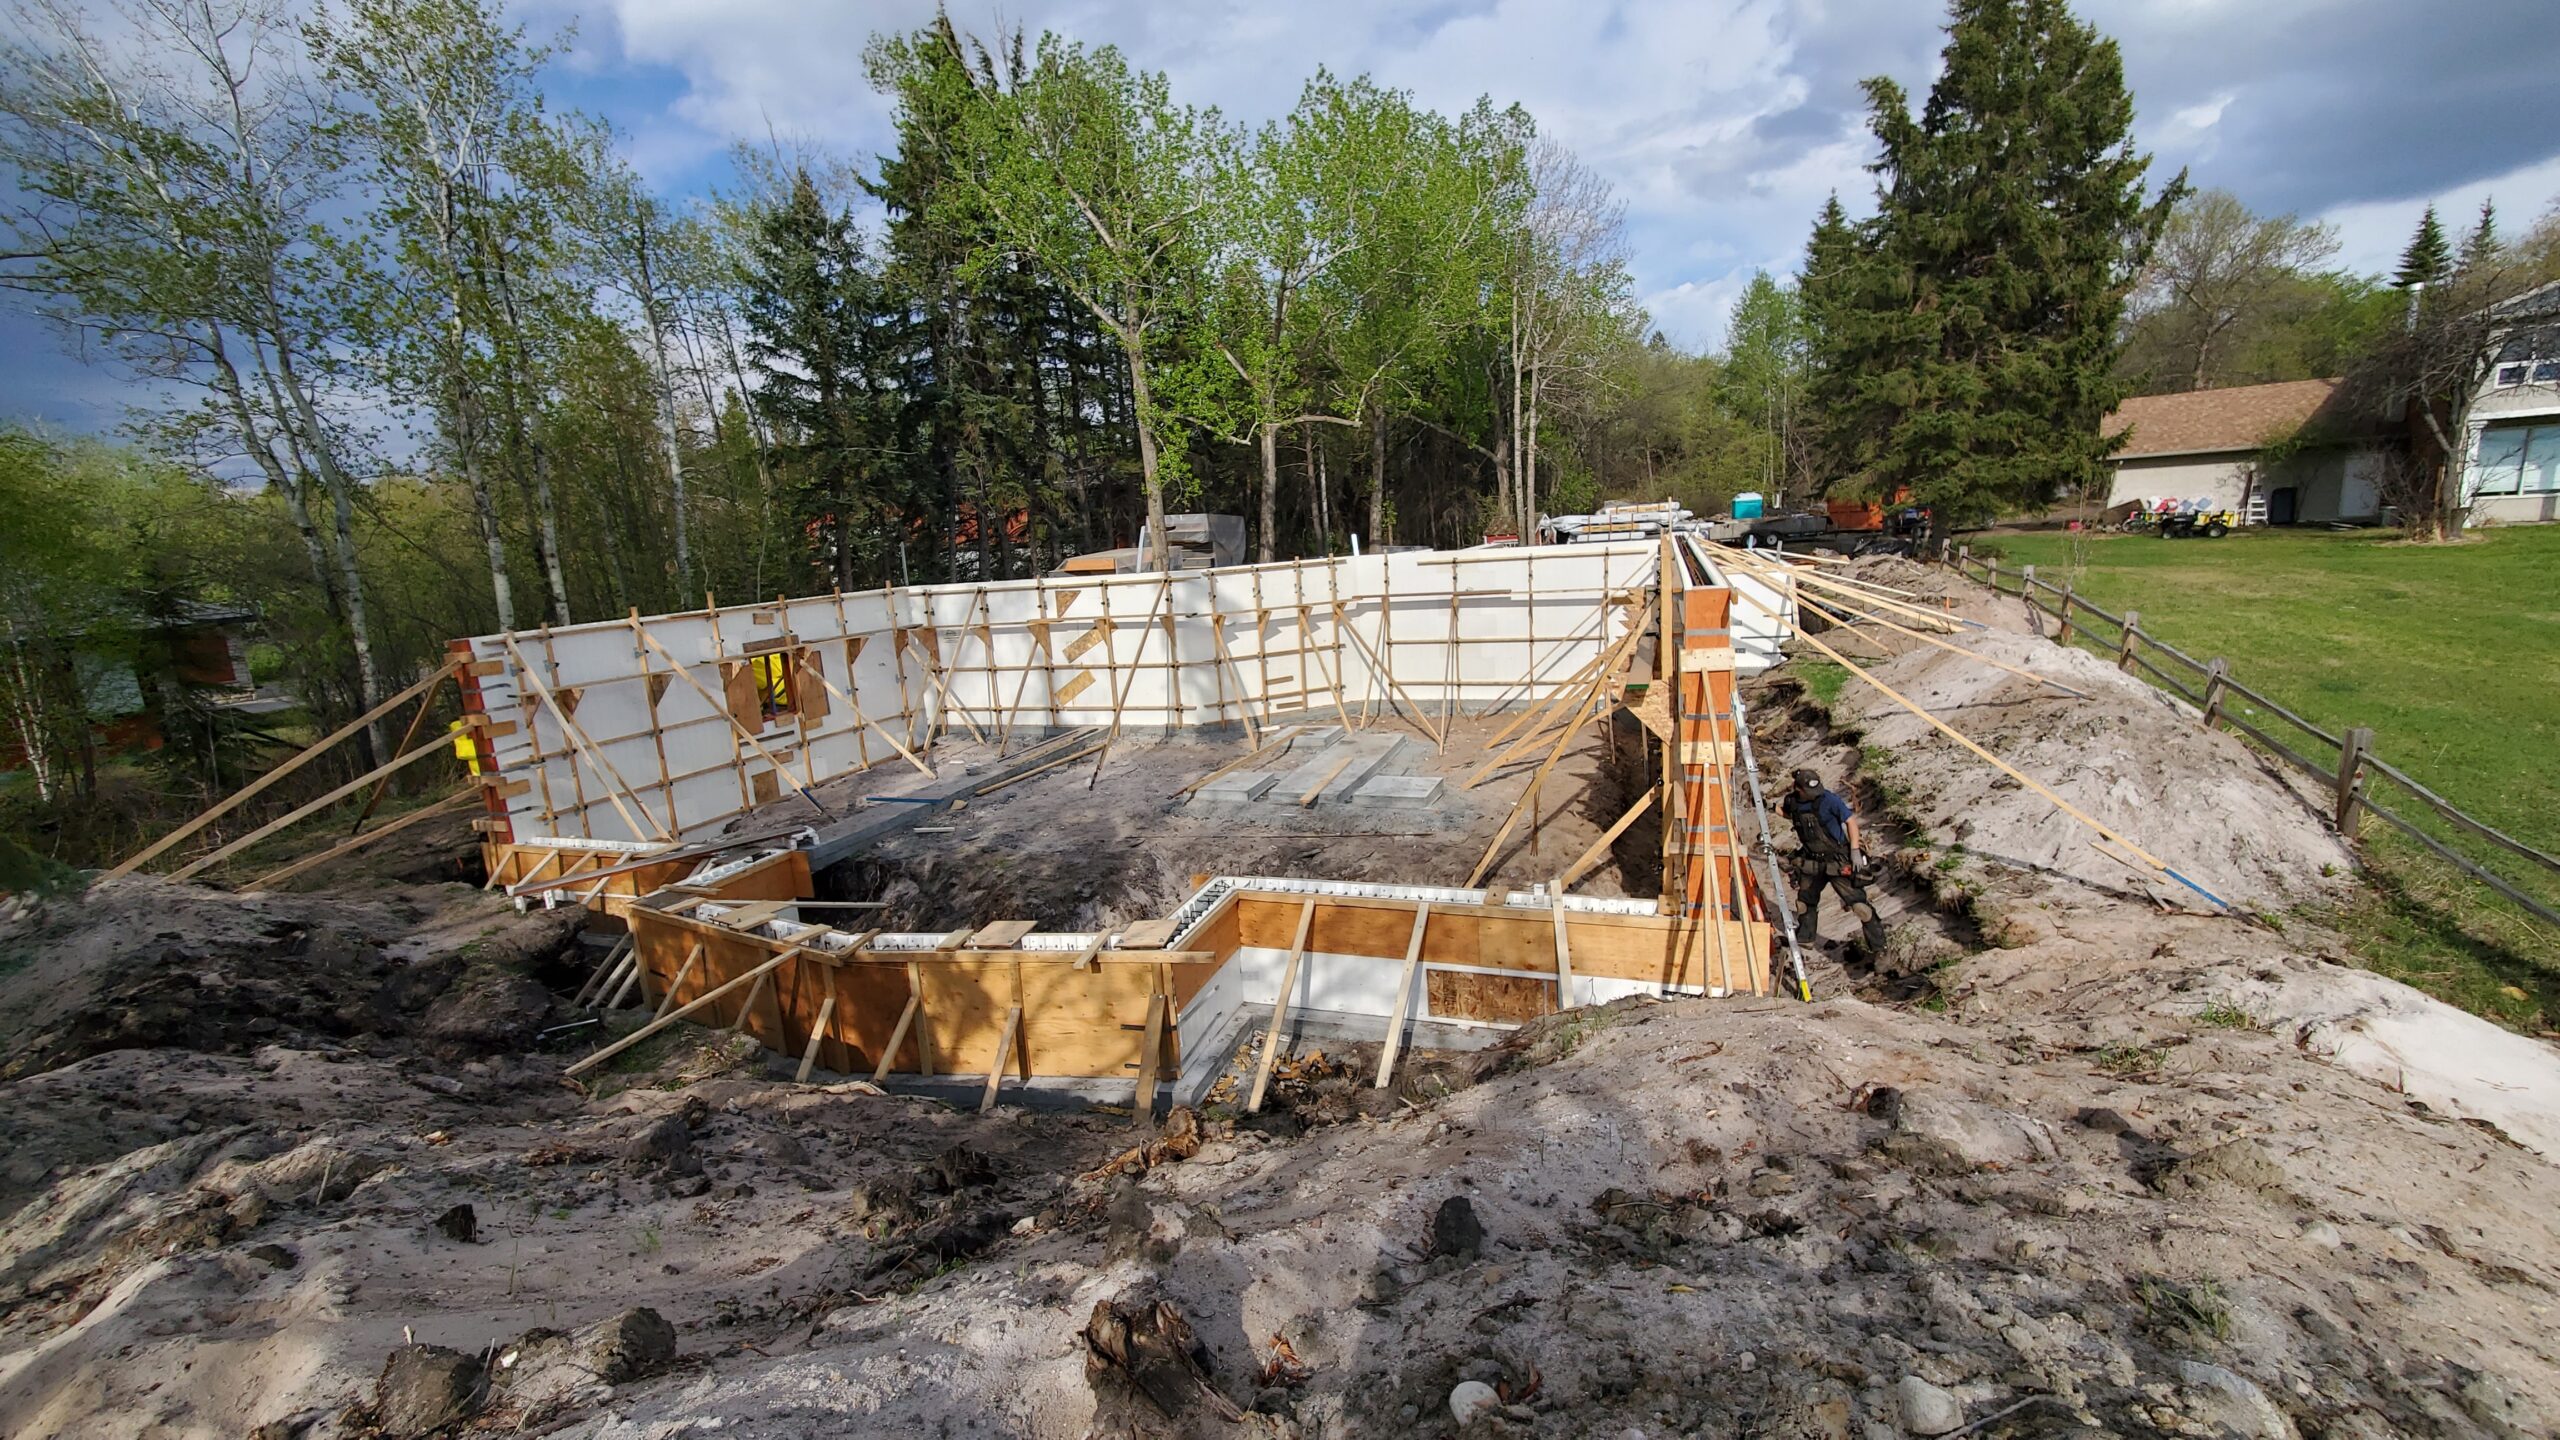 A scenic view of an Advantage ICF walk-out cabin under construction at Alberta Beach. The sturdy ICF blocks form the framework, showcasing the structural integrity before the concrete pour. The serene lakeside setting enhances the anticipation of a durable, energy-efficient retreat in the making.